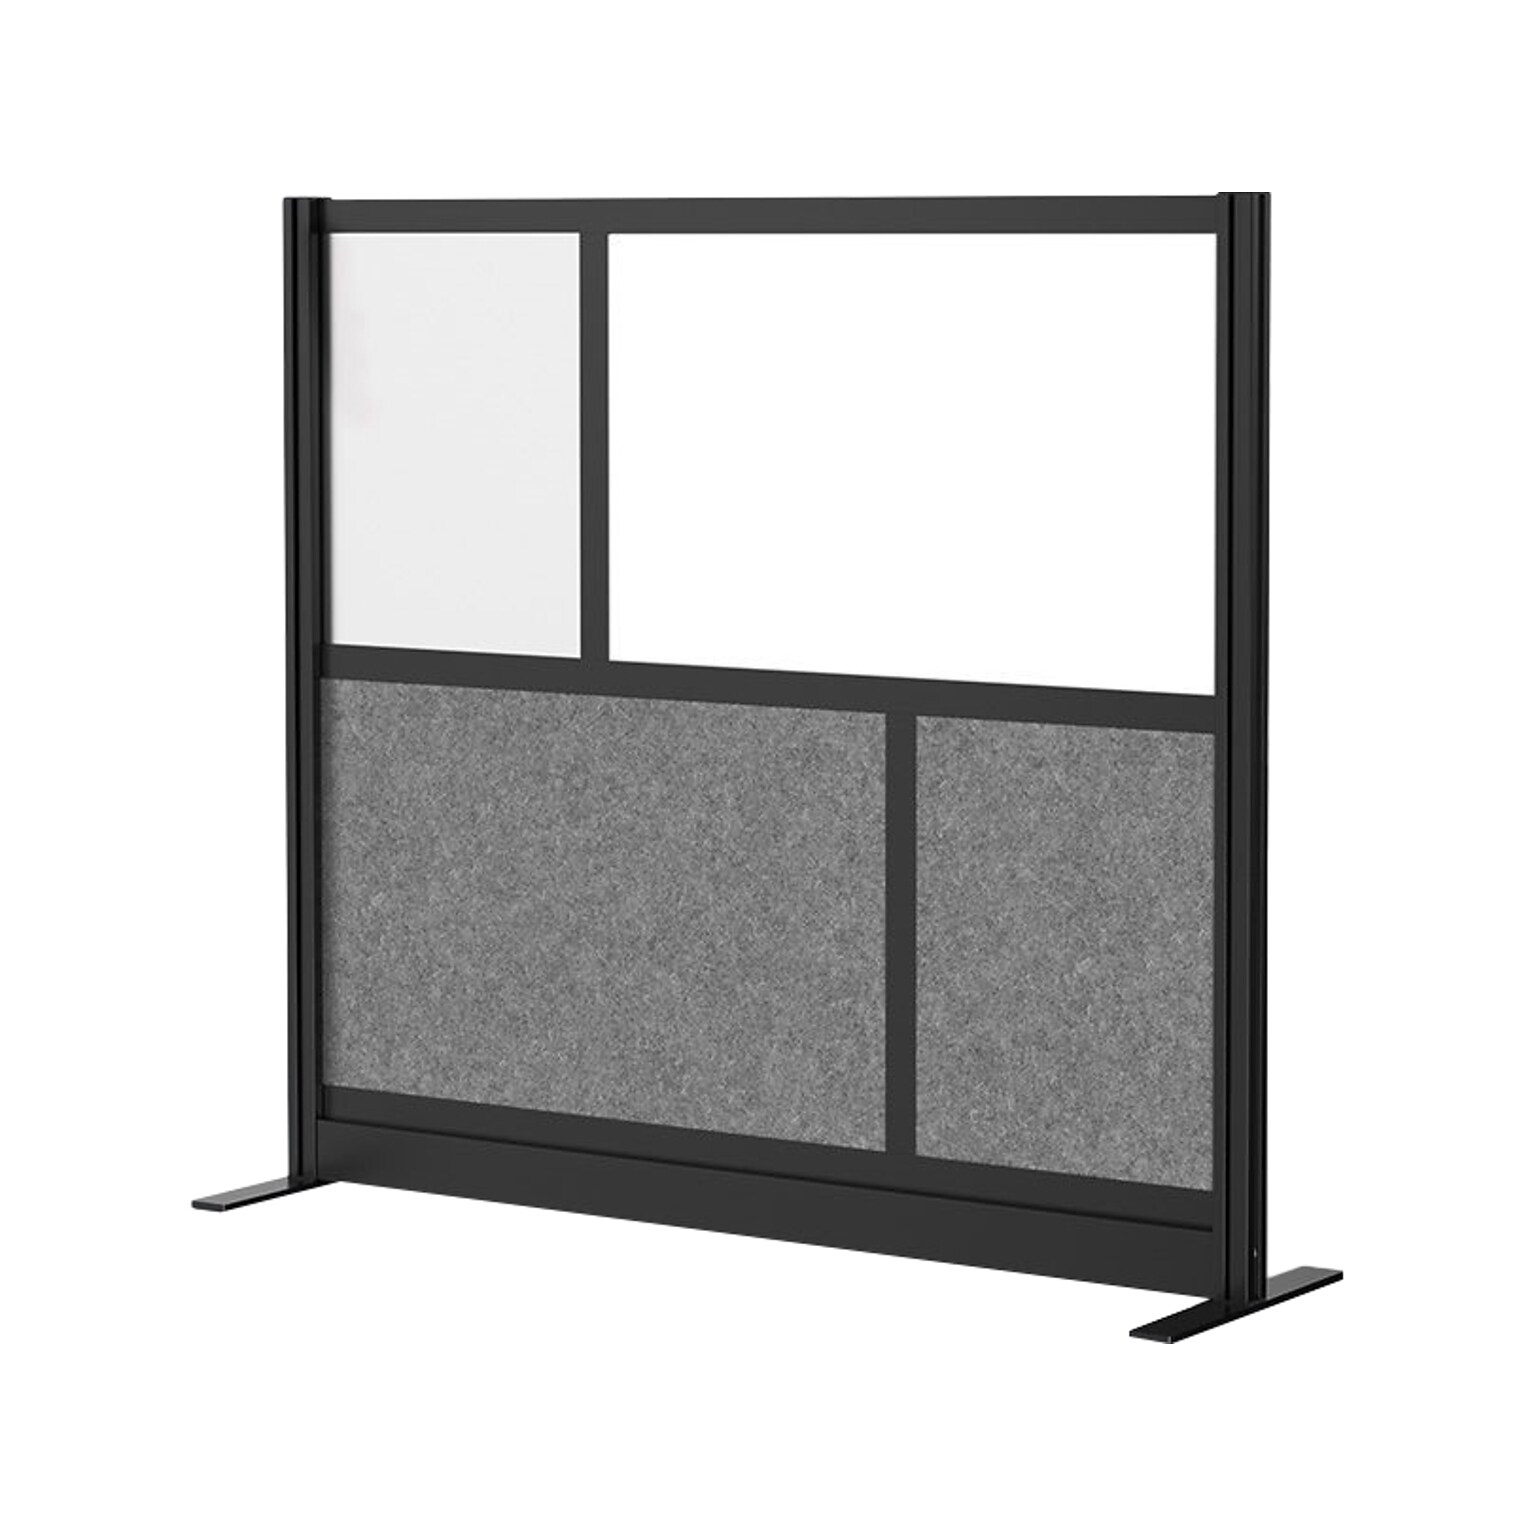 Luxor Workflow Series 4-Panel Freestanding Modular Room Divider System Starter Wall with Whiteboard, 48H x 53W, Black/Gray